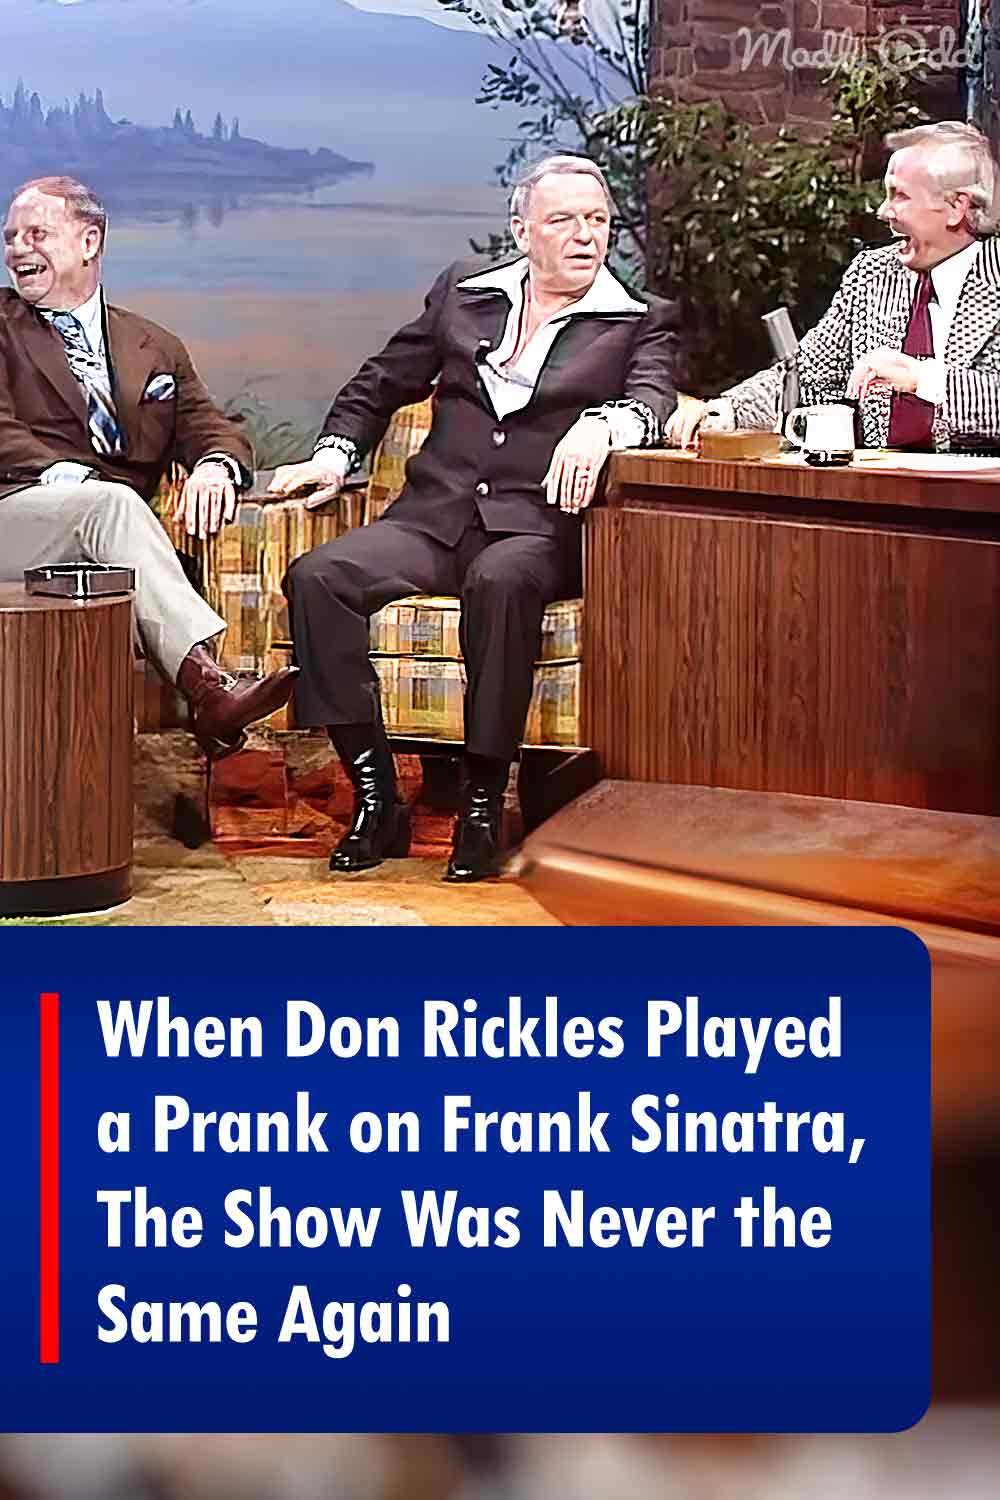 When Don Rickles Played a Prank on Frank Sinatra, The Show Was Never the Same Again